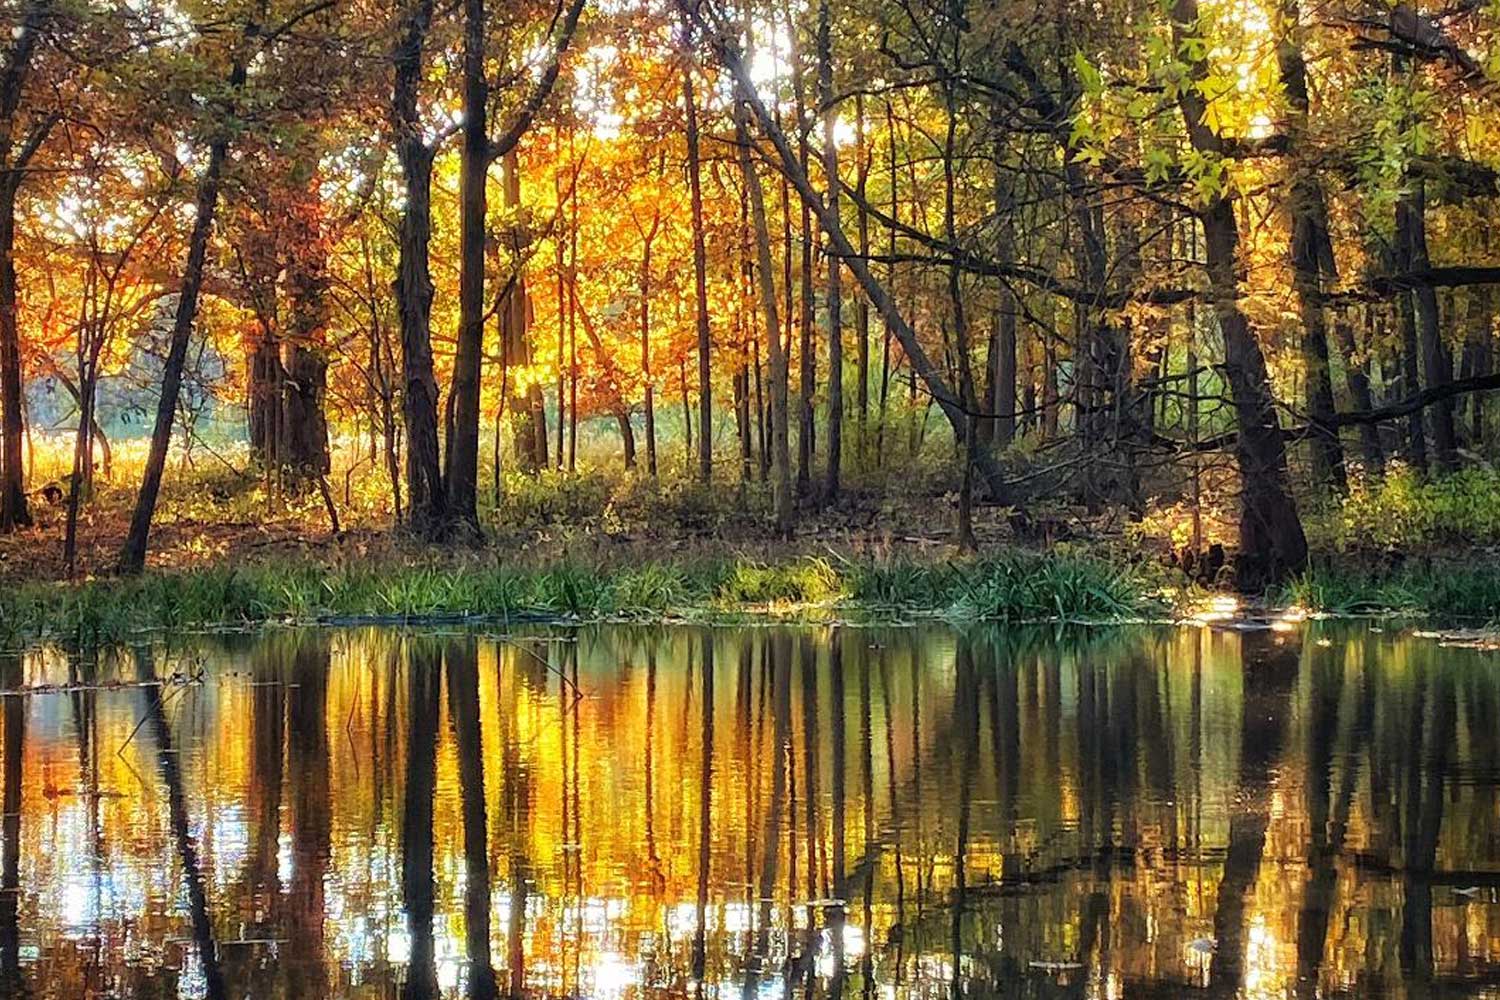 A still pond reflecting the landscape of trees with orange and yellow leaves in fall. 